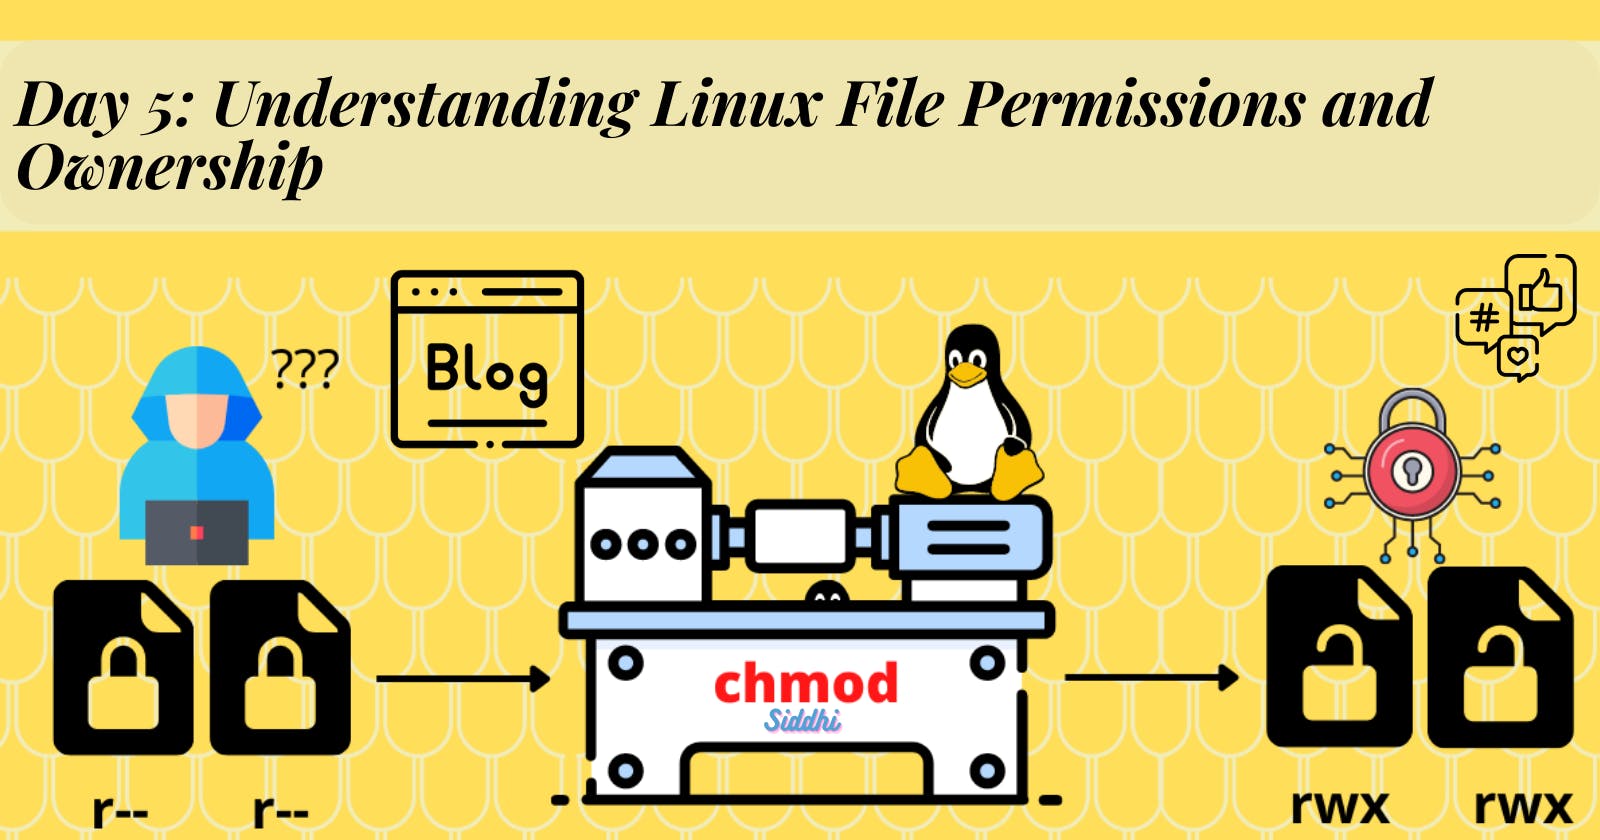 Day 5: 🔒 Understanding Linux File Permissions and Ownership 🔒